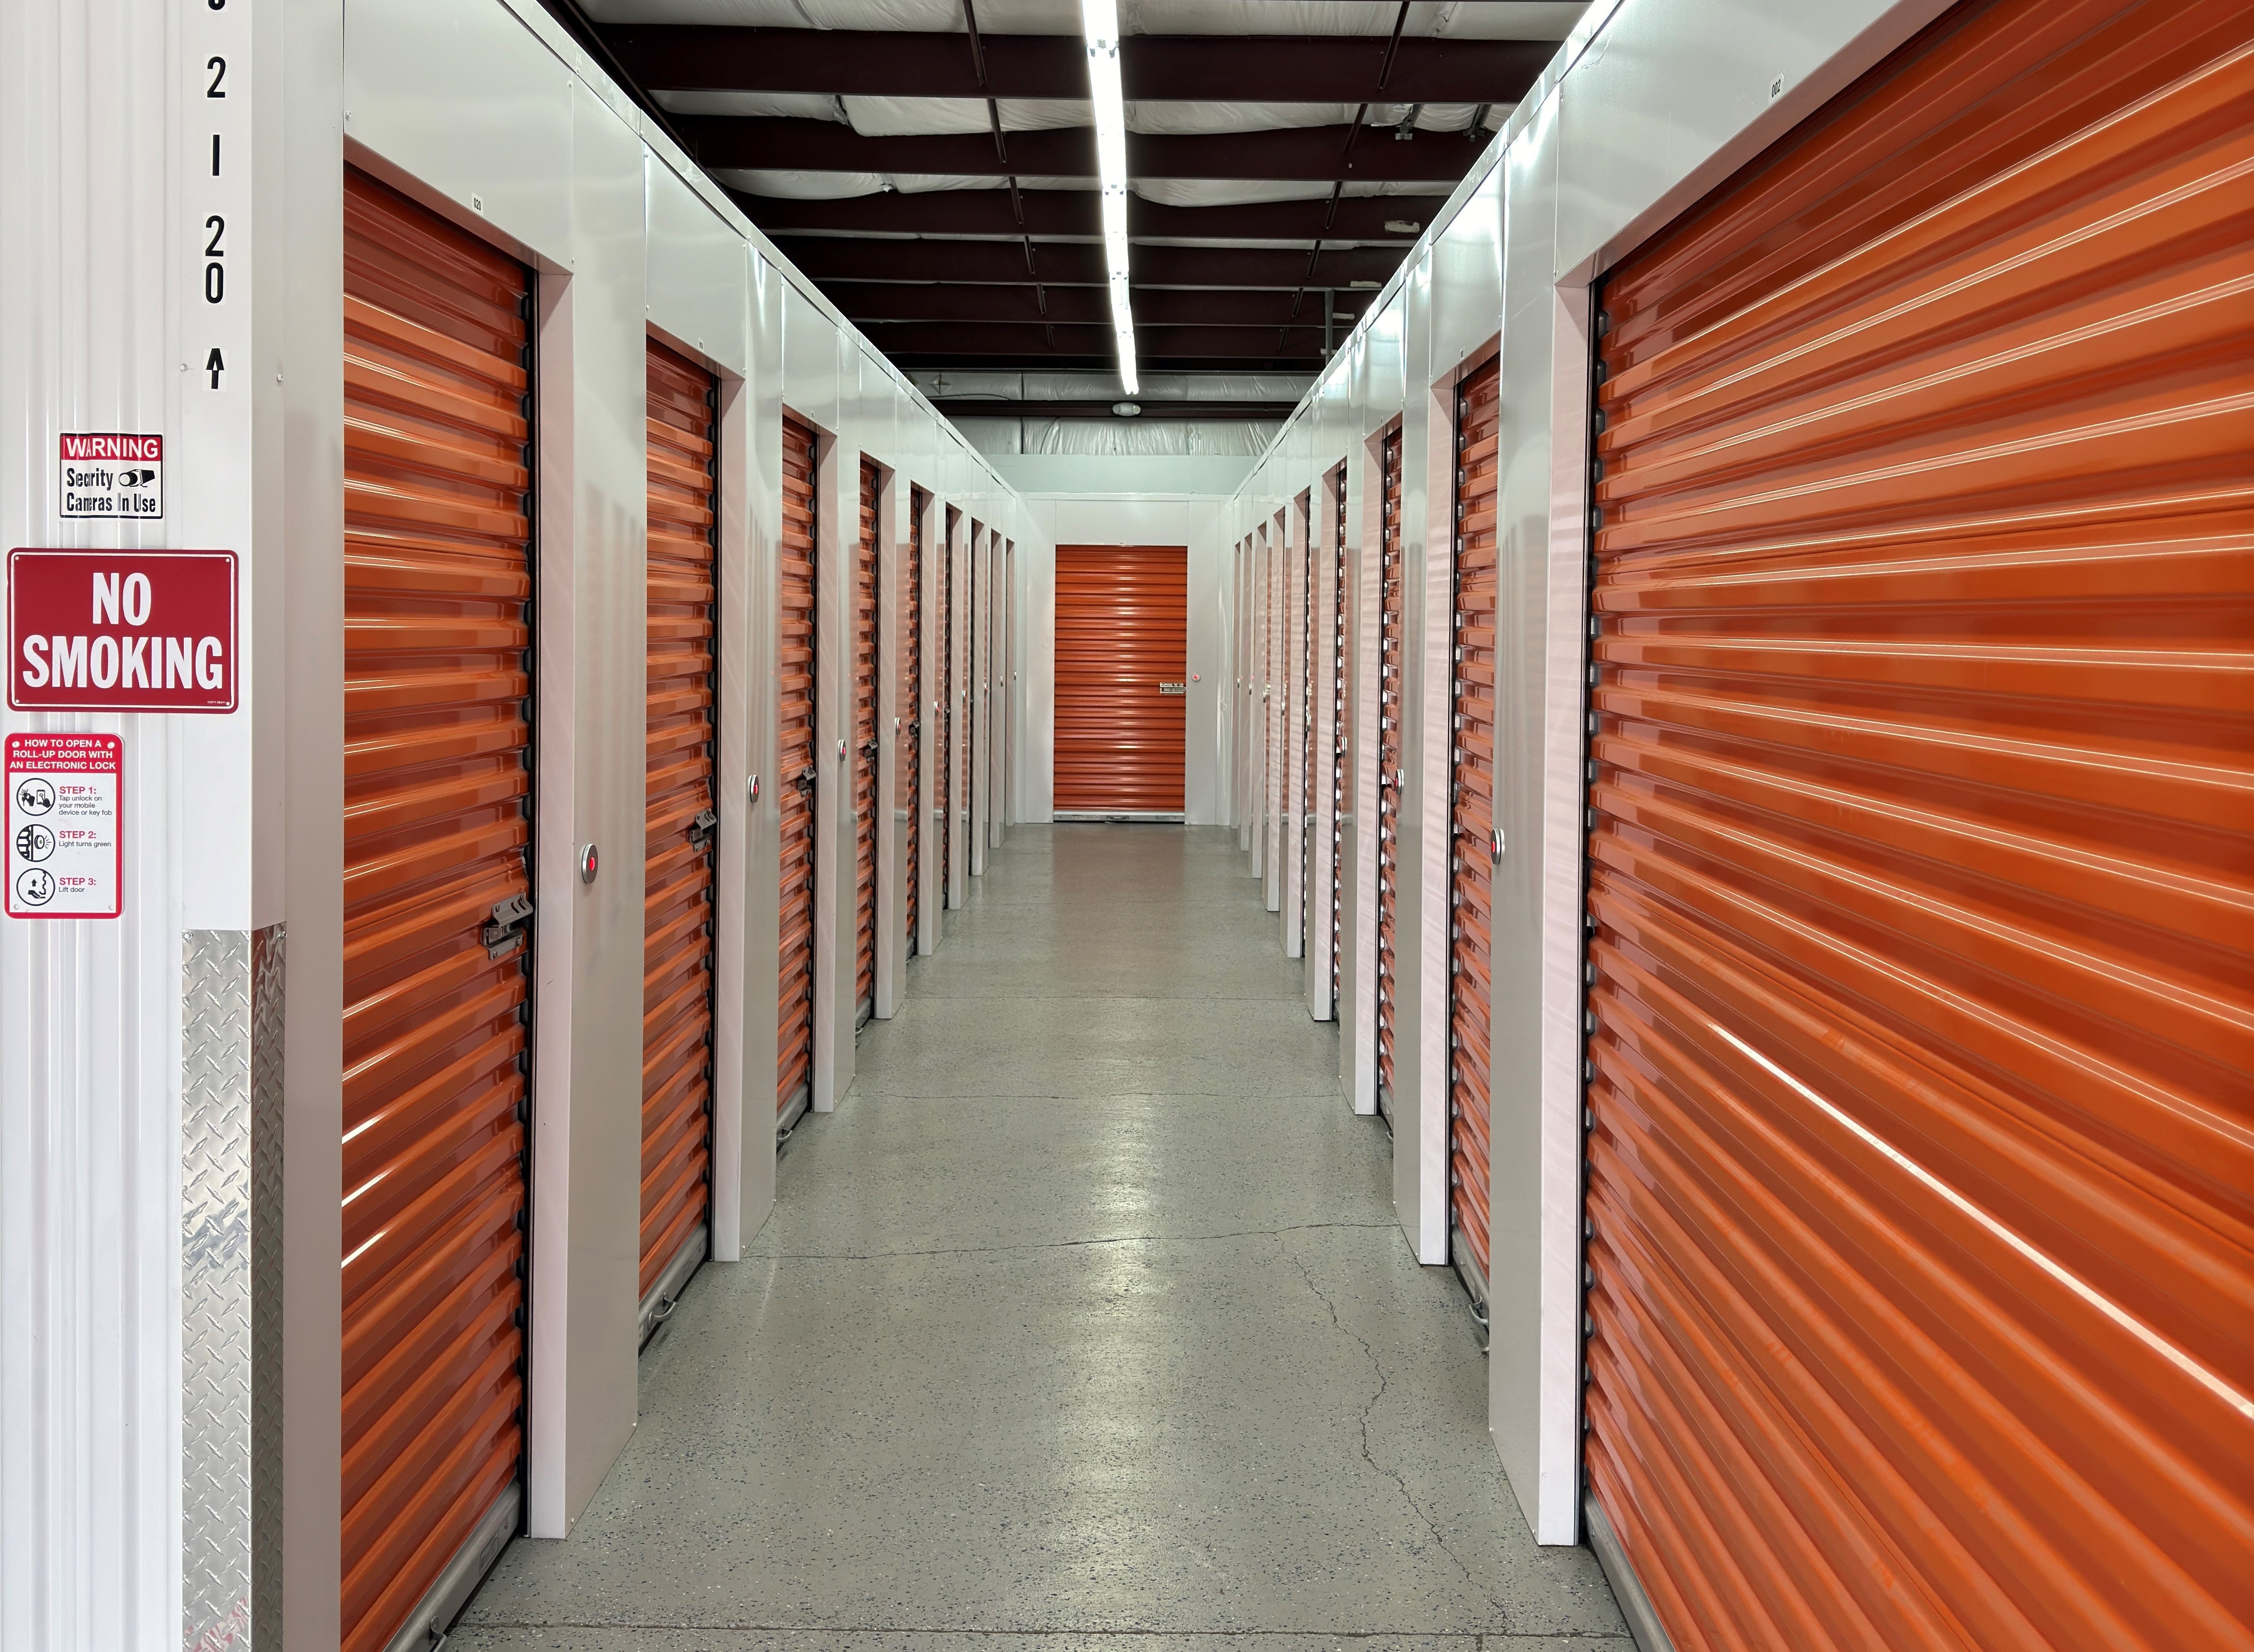 Lock Wise Self Storage - Rosedale Road - Indoor Climate-Controlled Storage in Silver City, NM